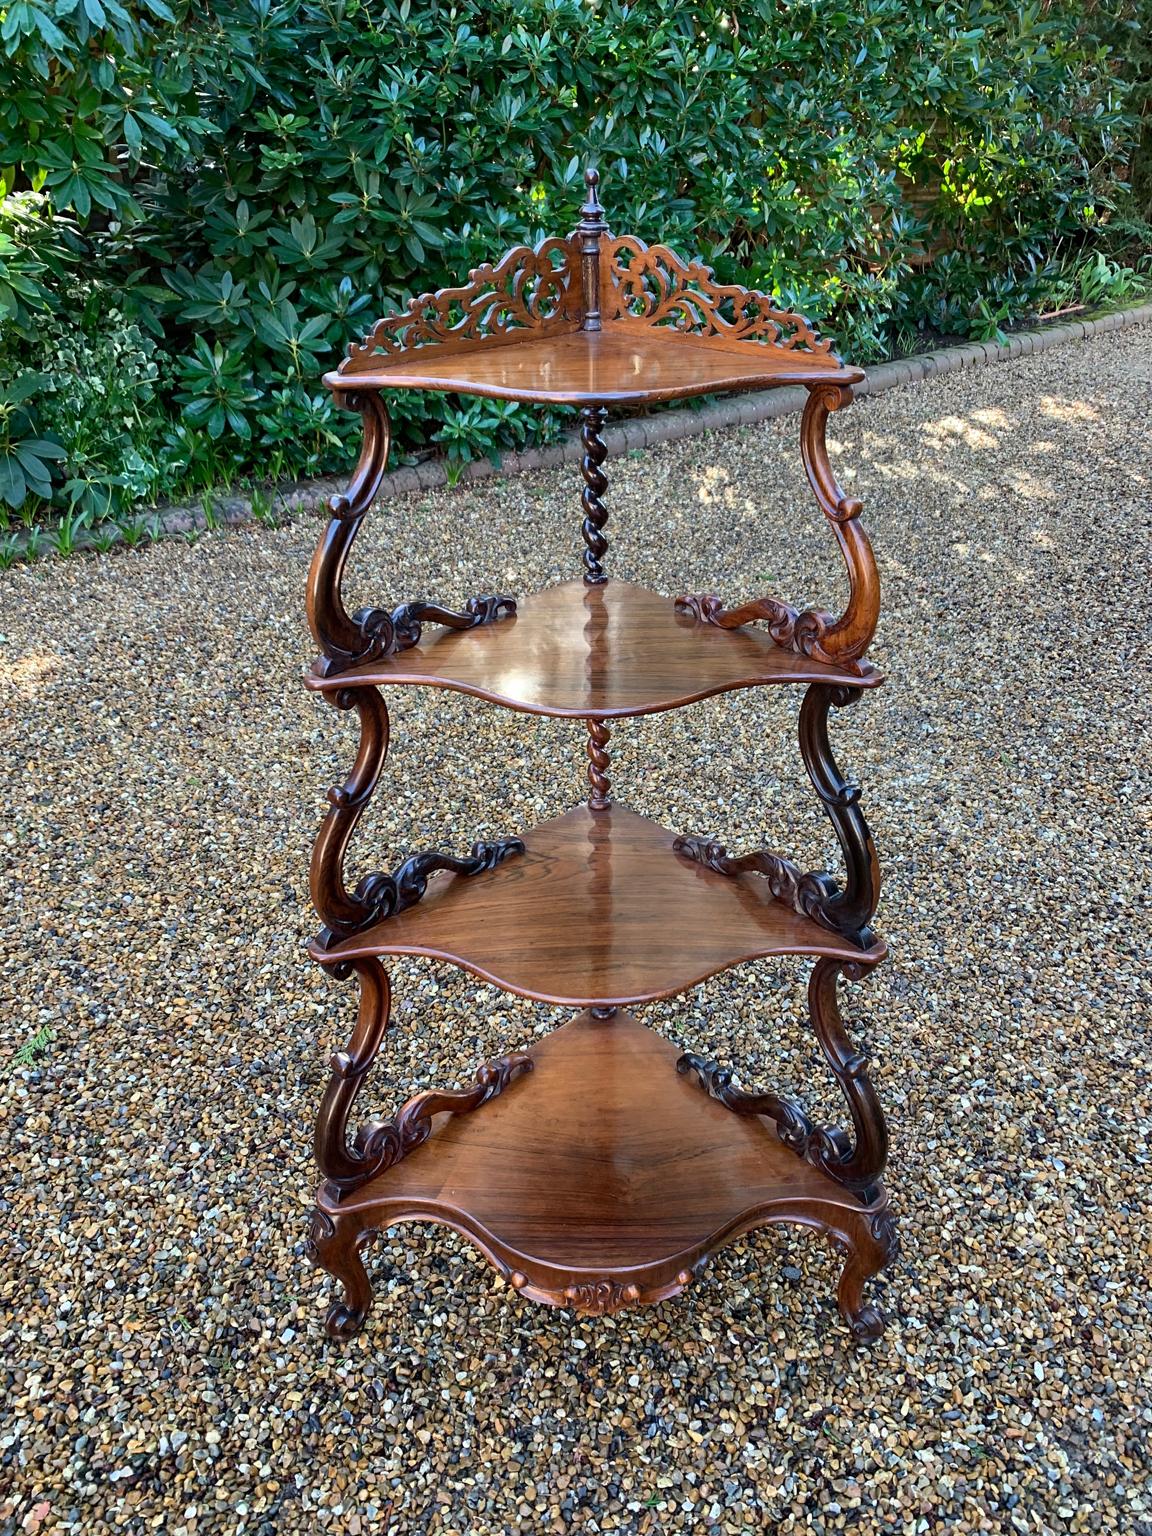 19th Century Victorian Rosewood Corner Whatnot, with a fret carved gallery over four serpentine tiers raised on turned spiral columns, all standing on cabriole legs.

Circa: 1835.